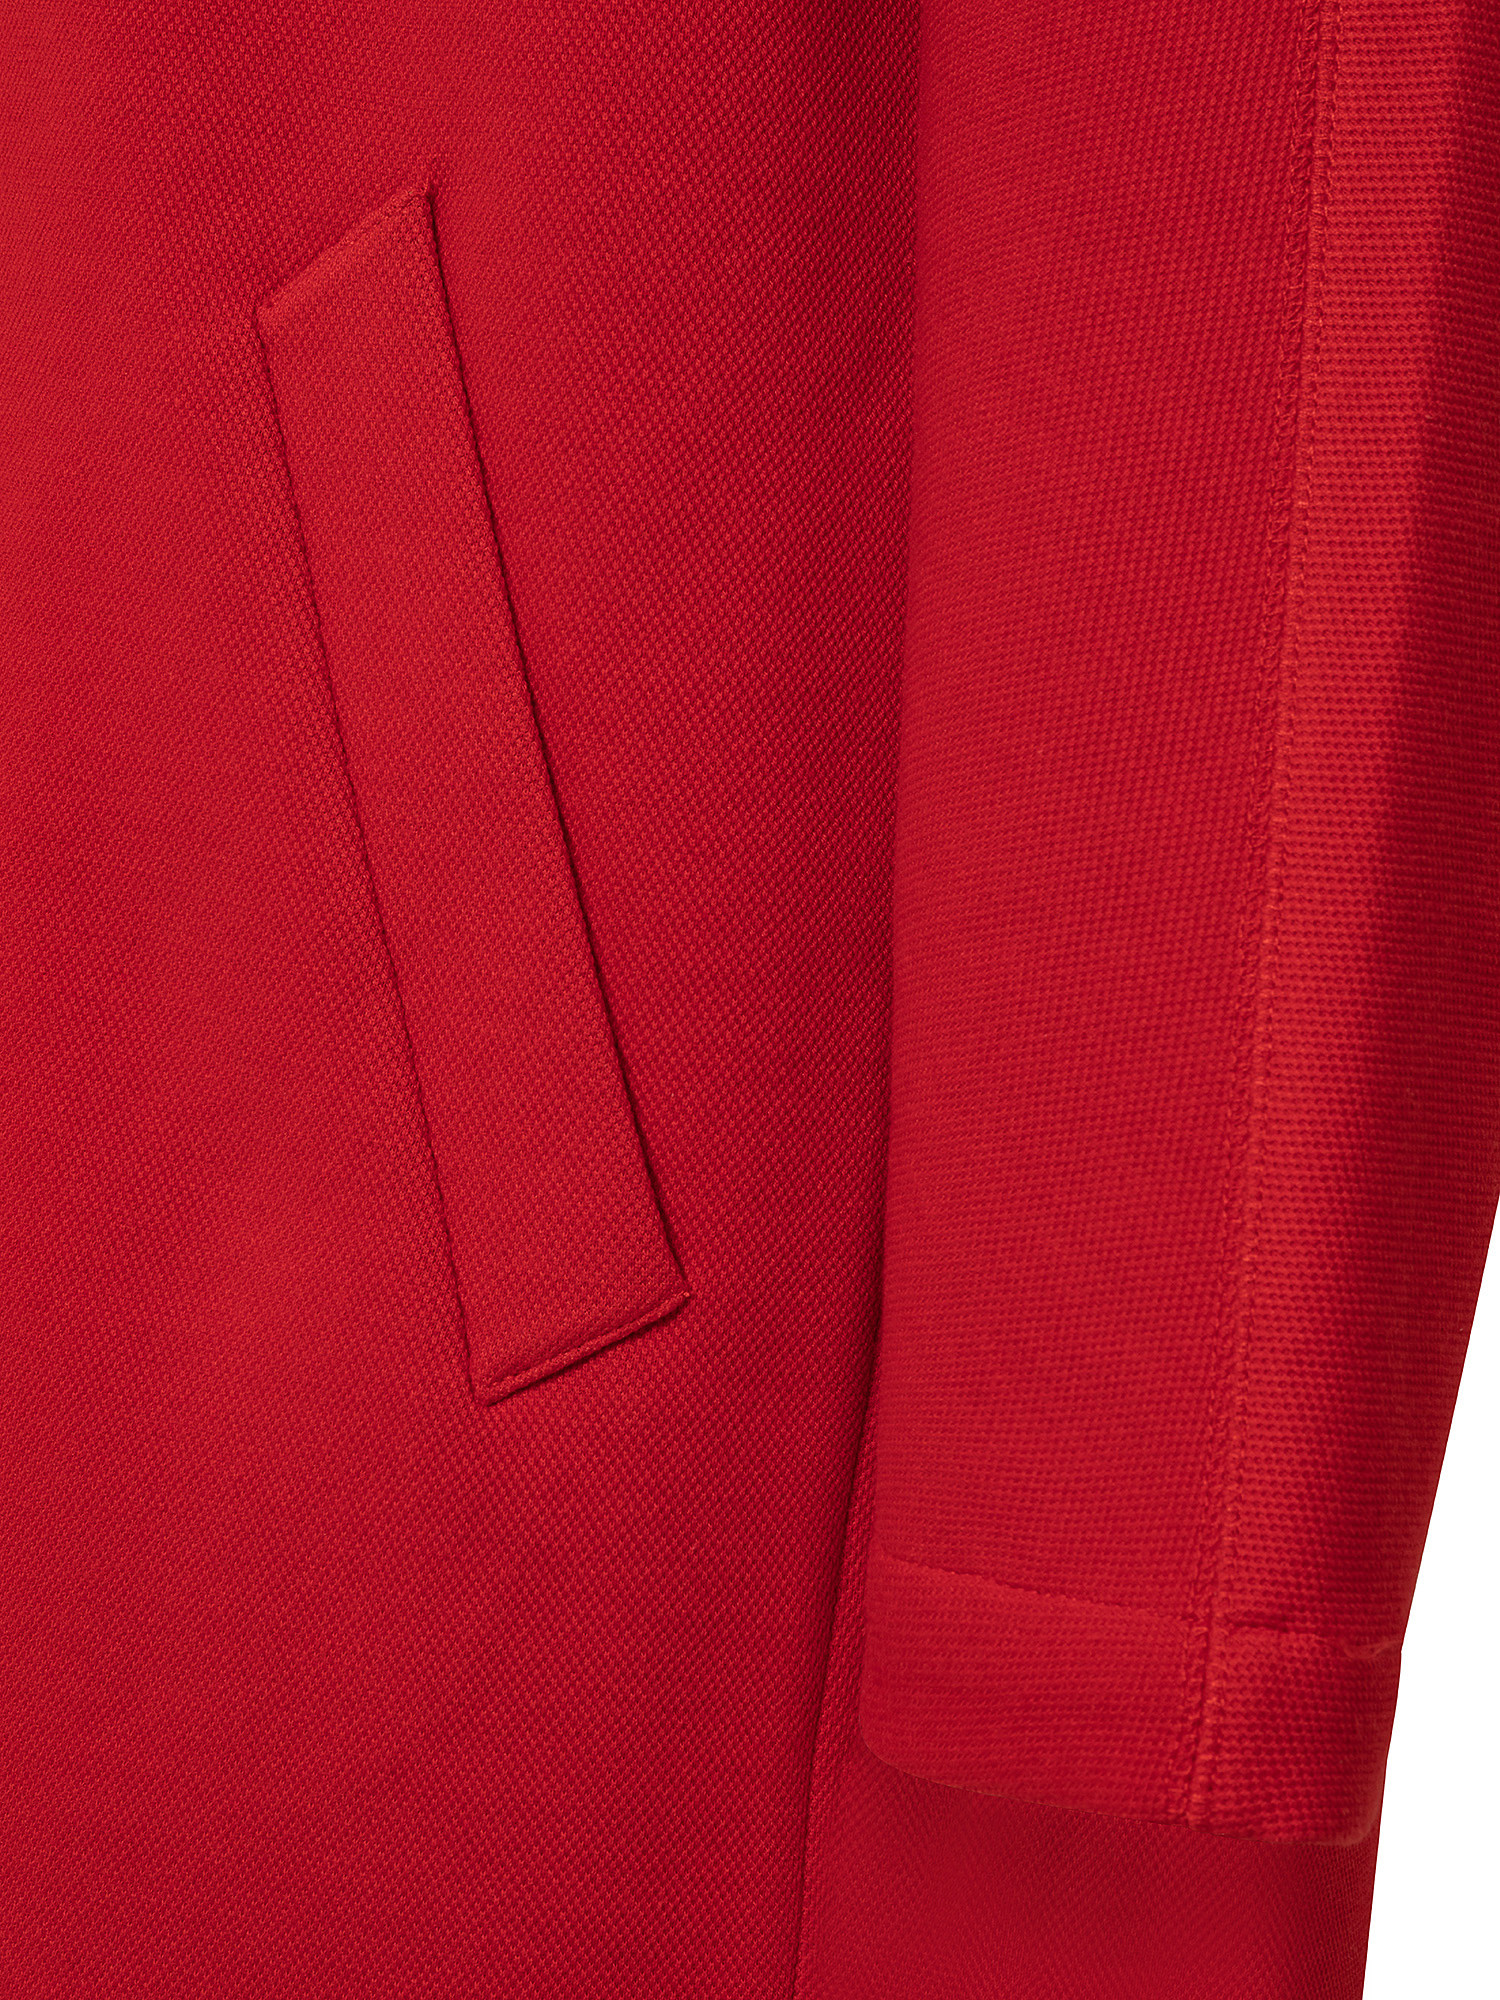 Oversize unlined coat, Red, large image number 2